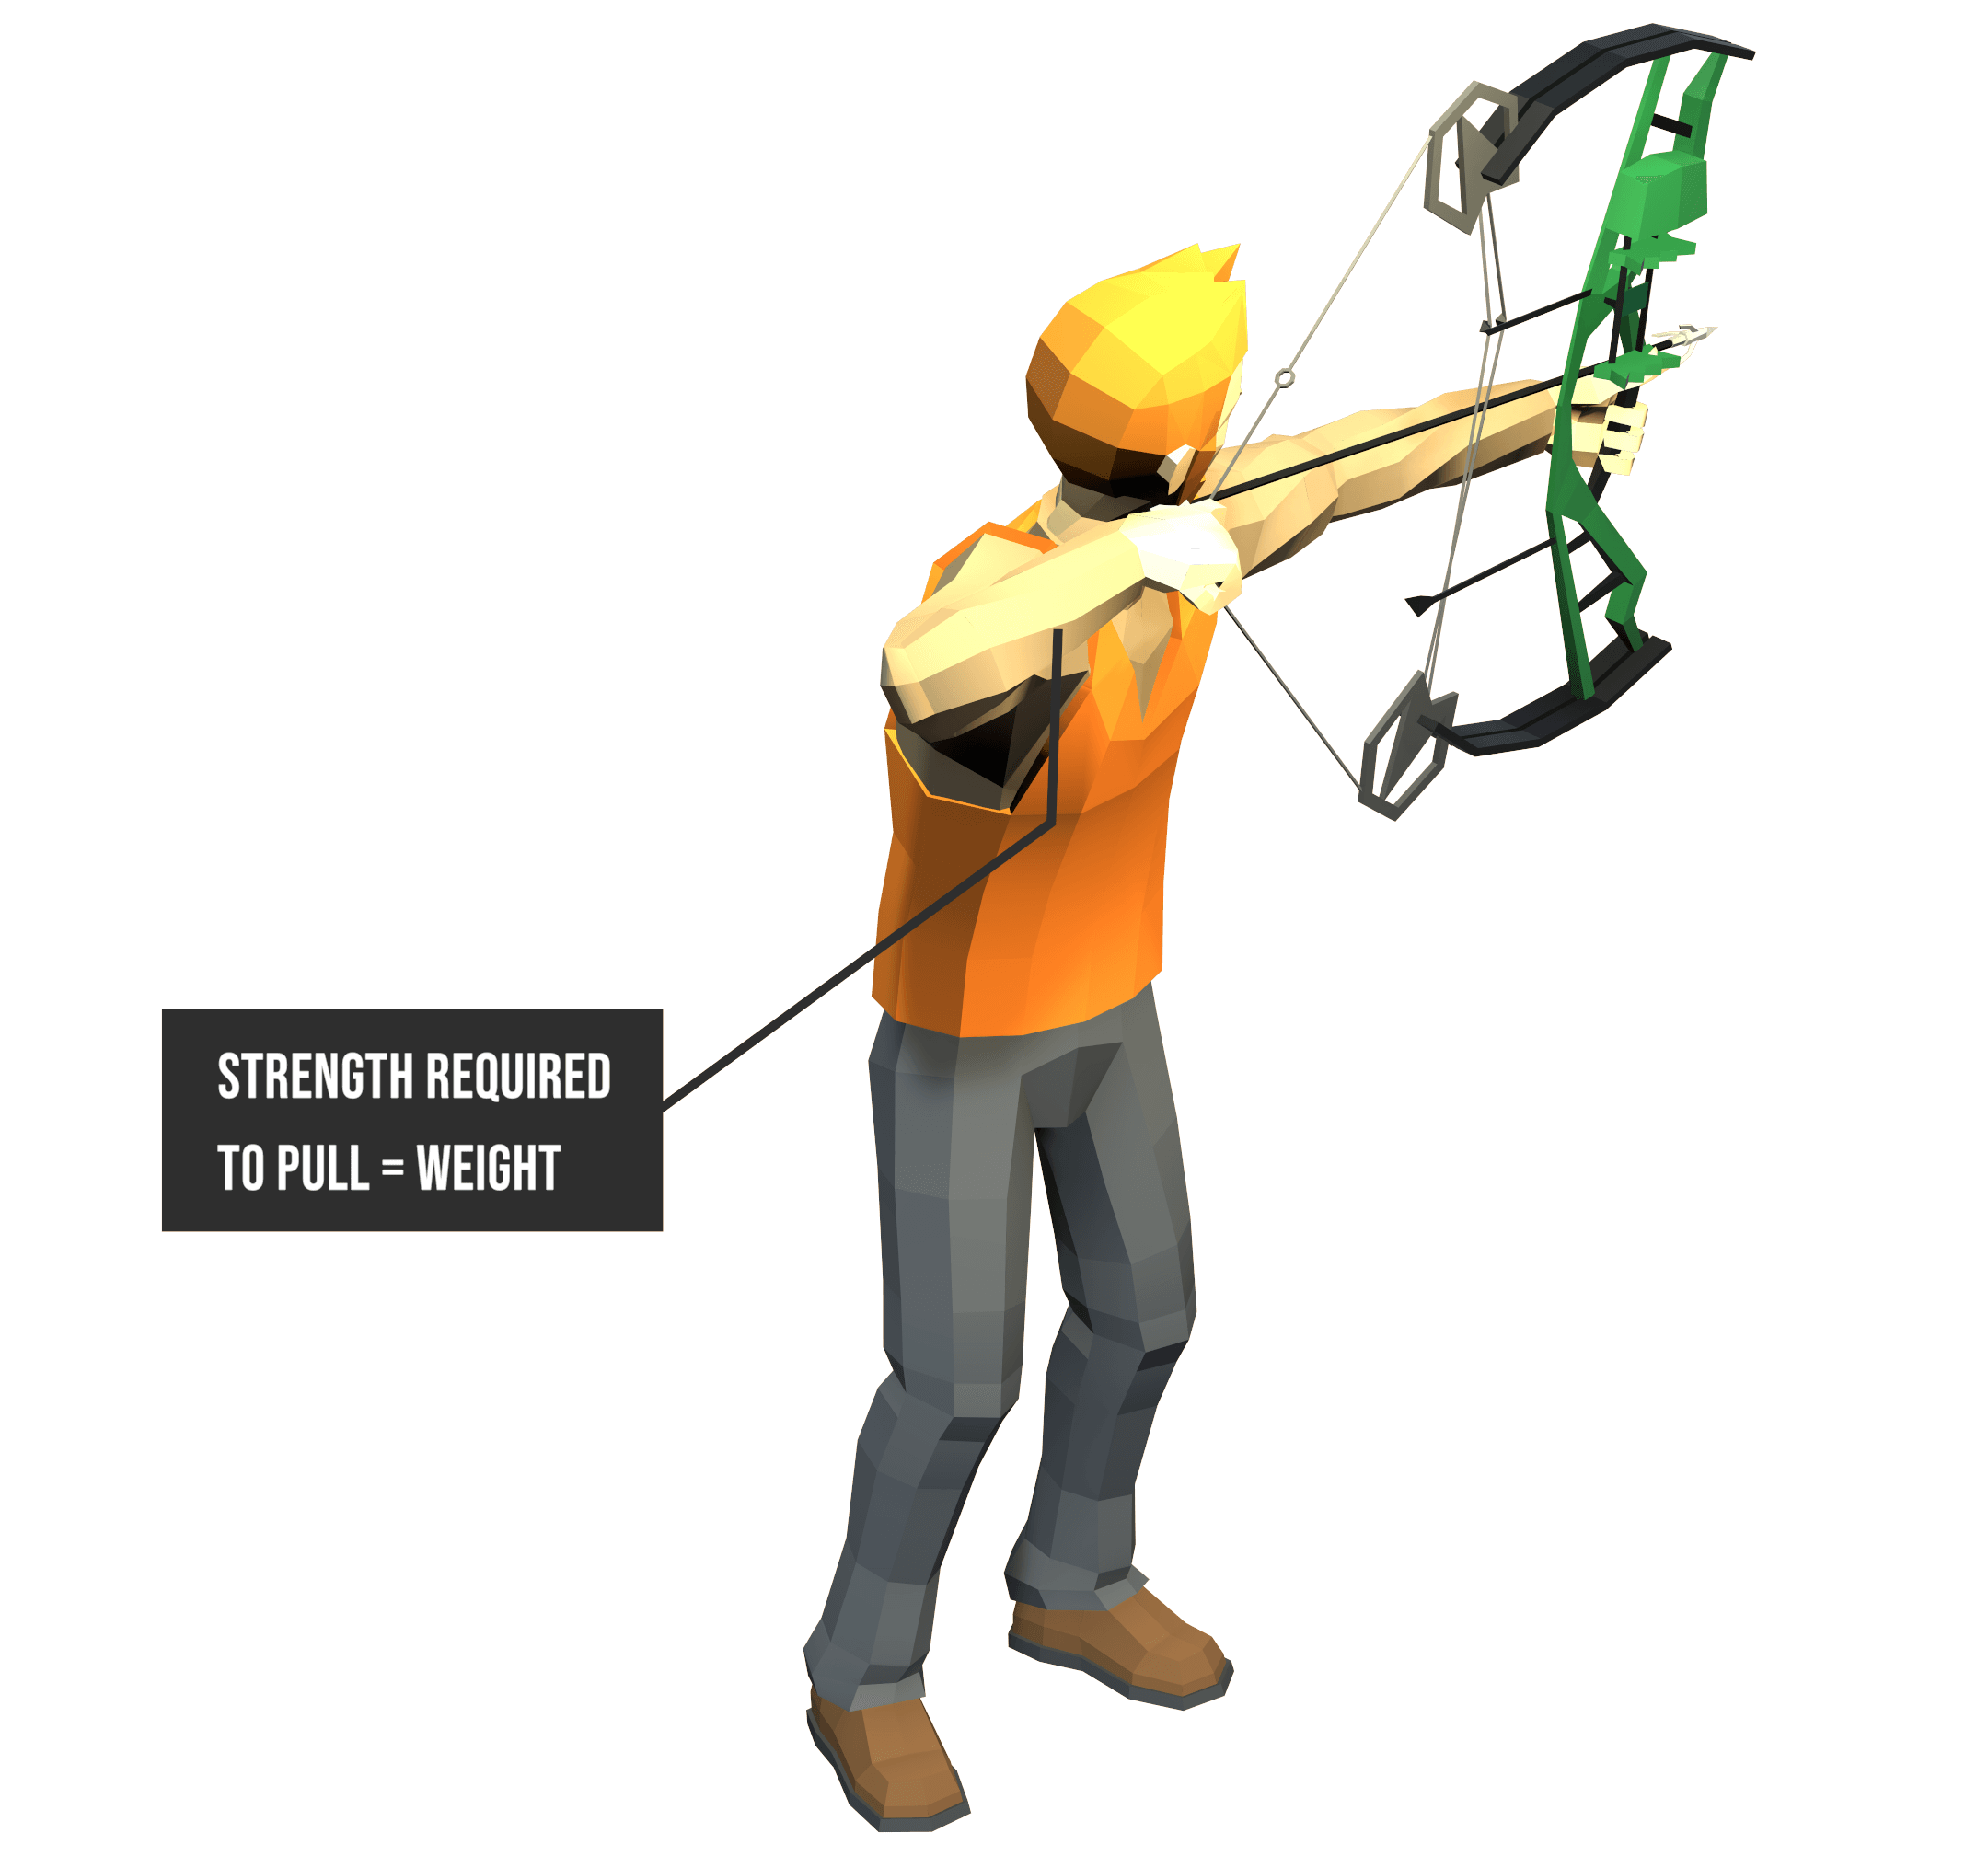 Archery - How to Aim Well